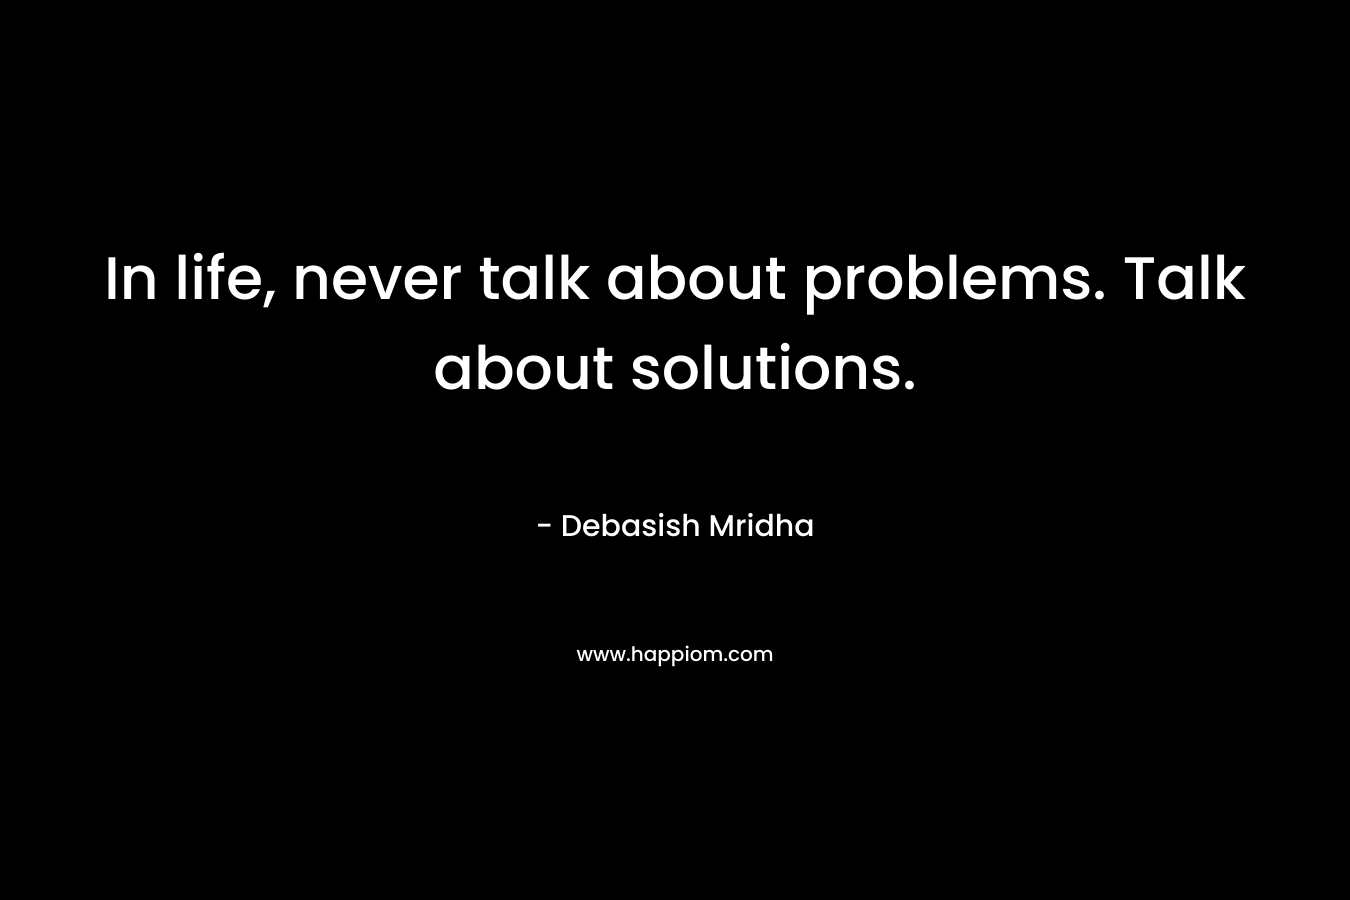 In life, never talk about problems. Talk about solutions.